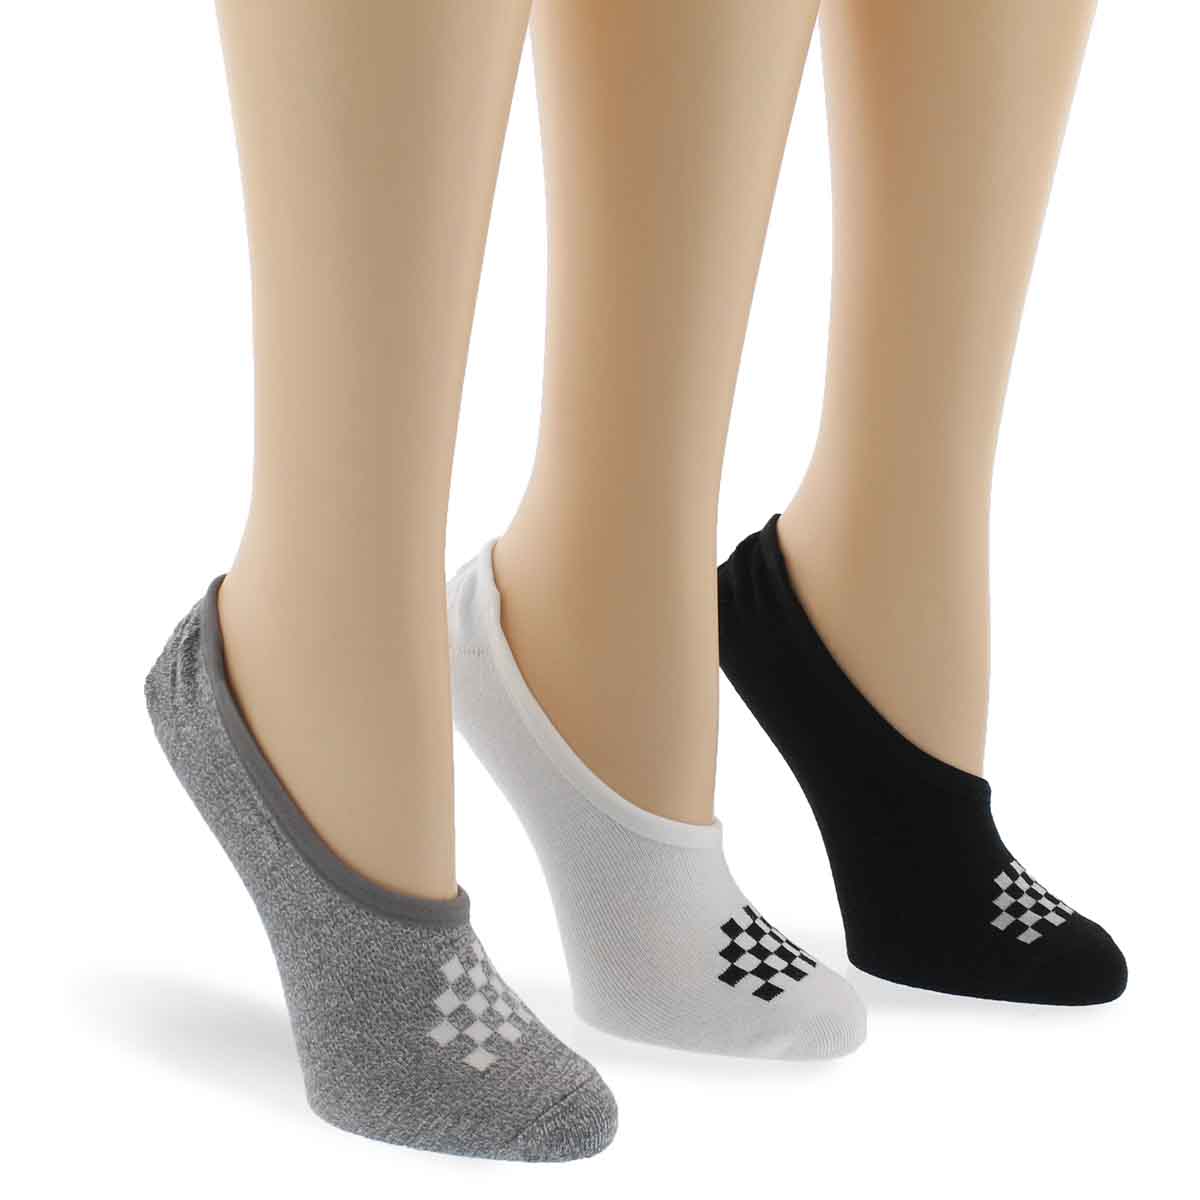 Women's CLASSIC CANOODLE Ankle Sock - Blk/Gry/Wht